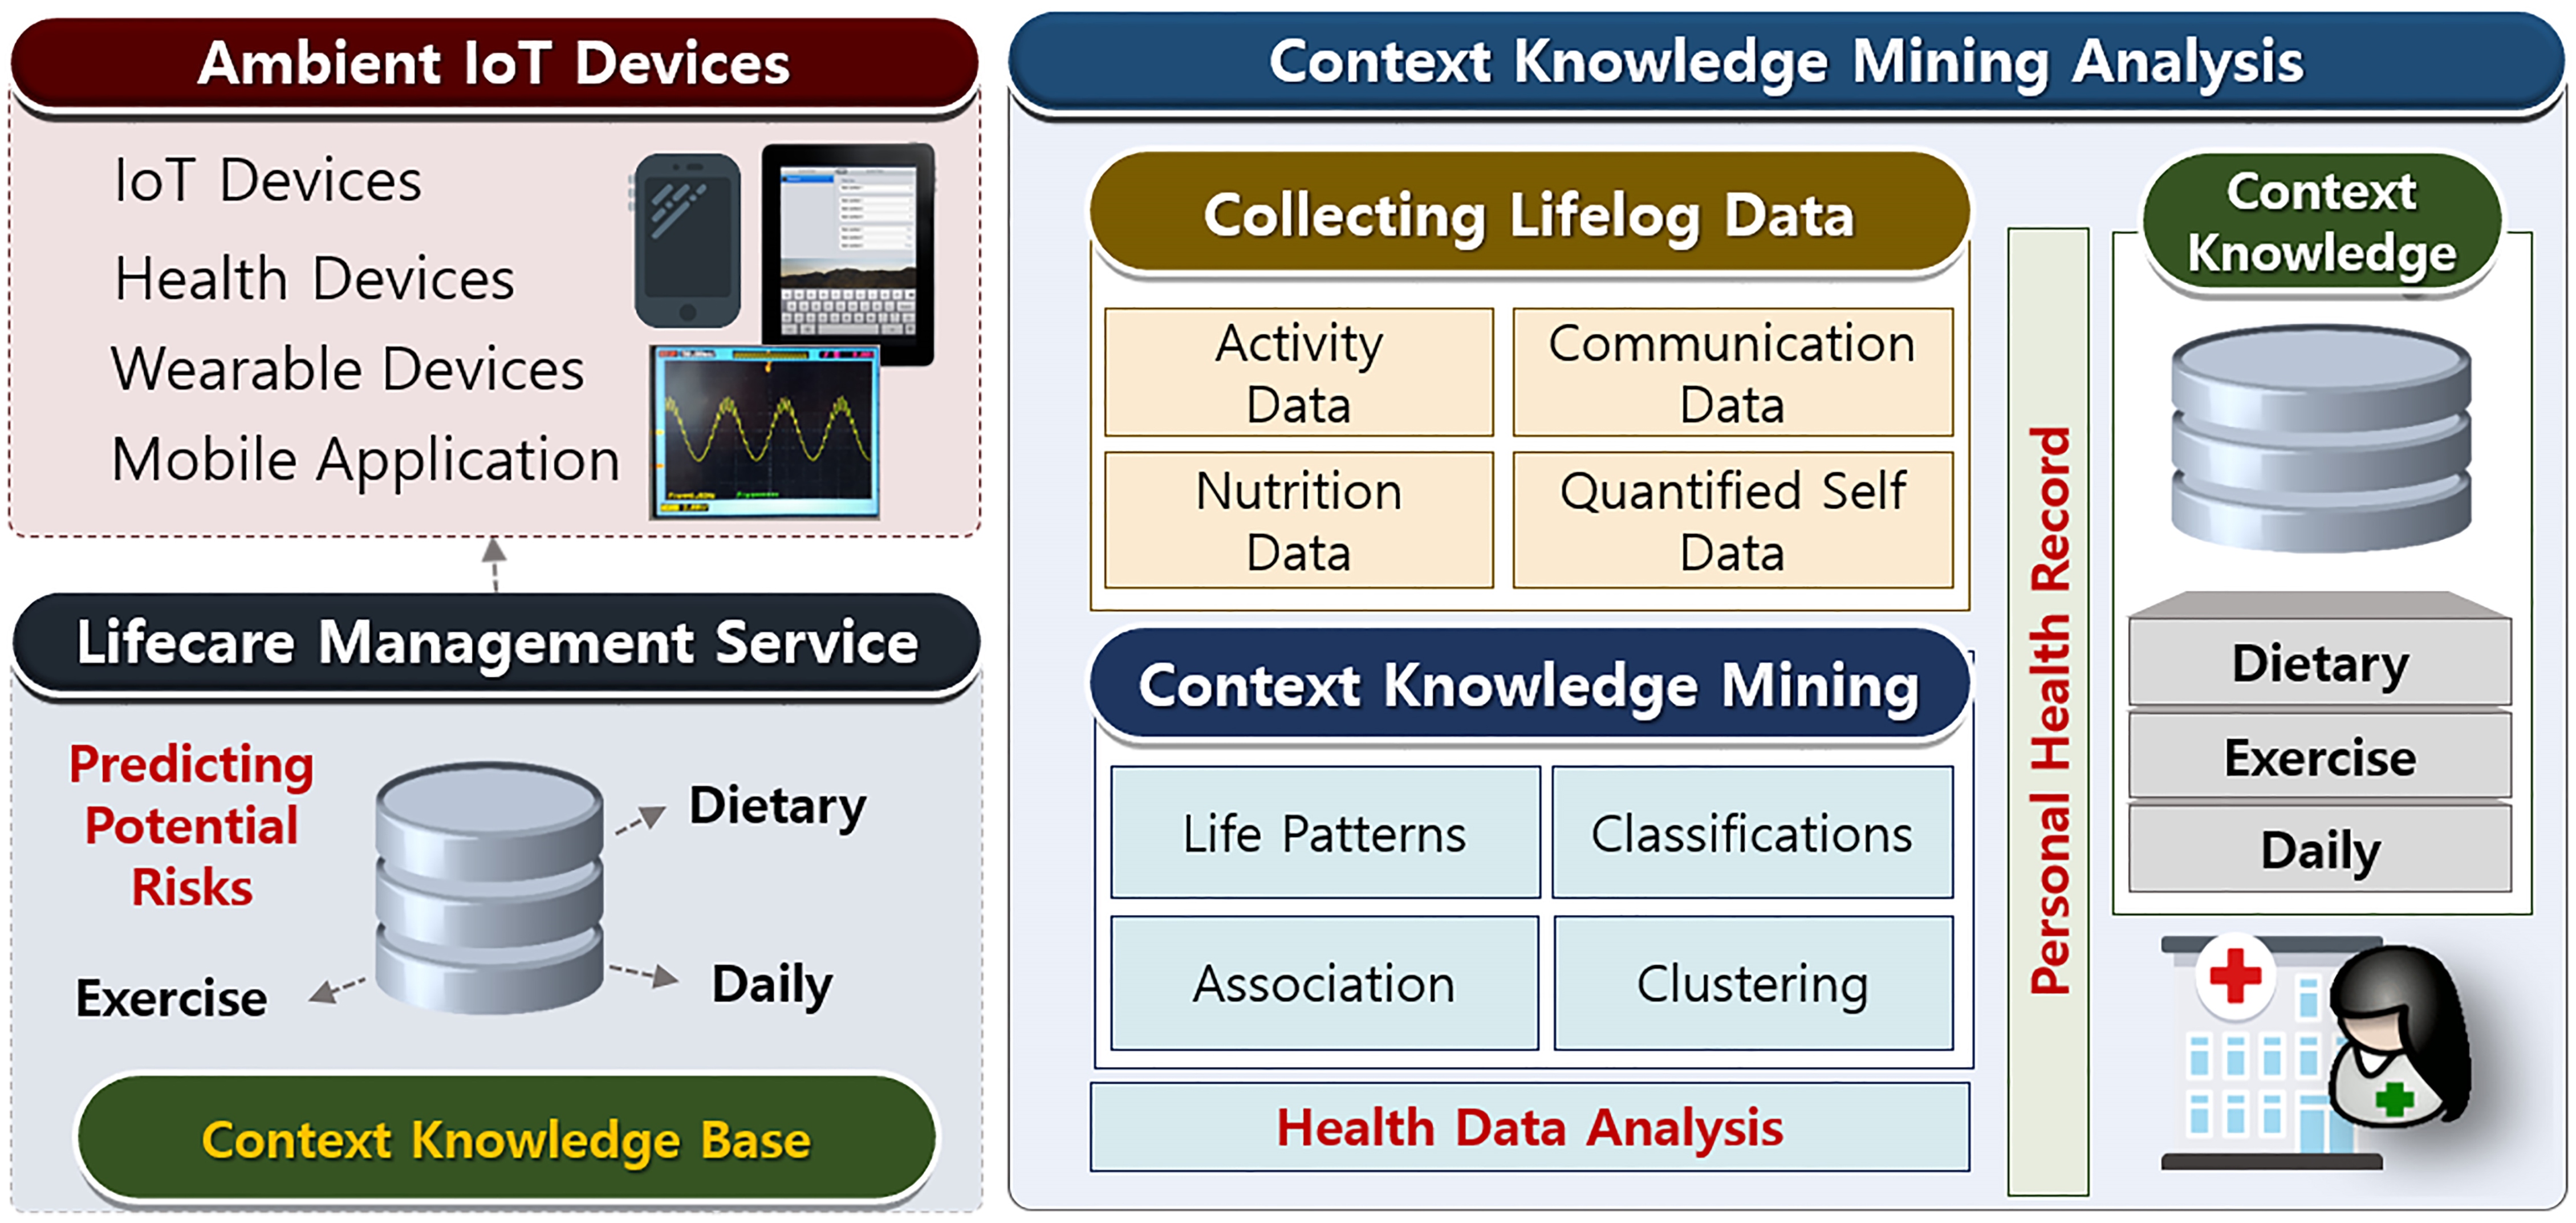 Configuration of context knowledge mining analysis for lifecare.